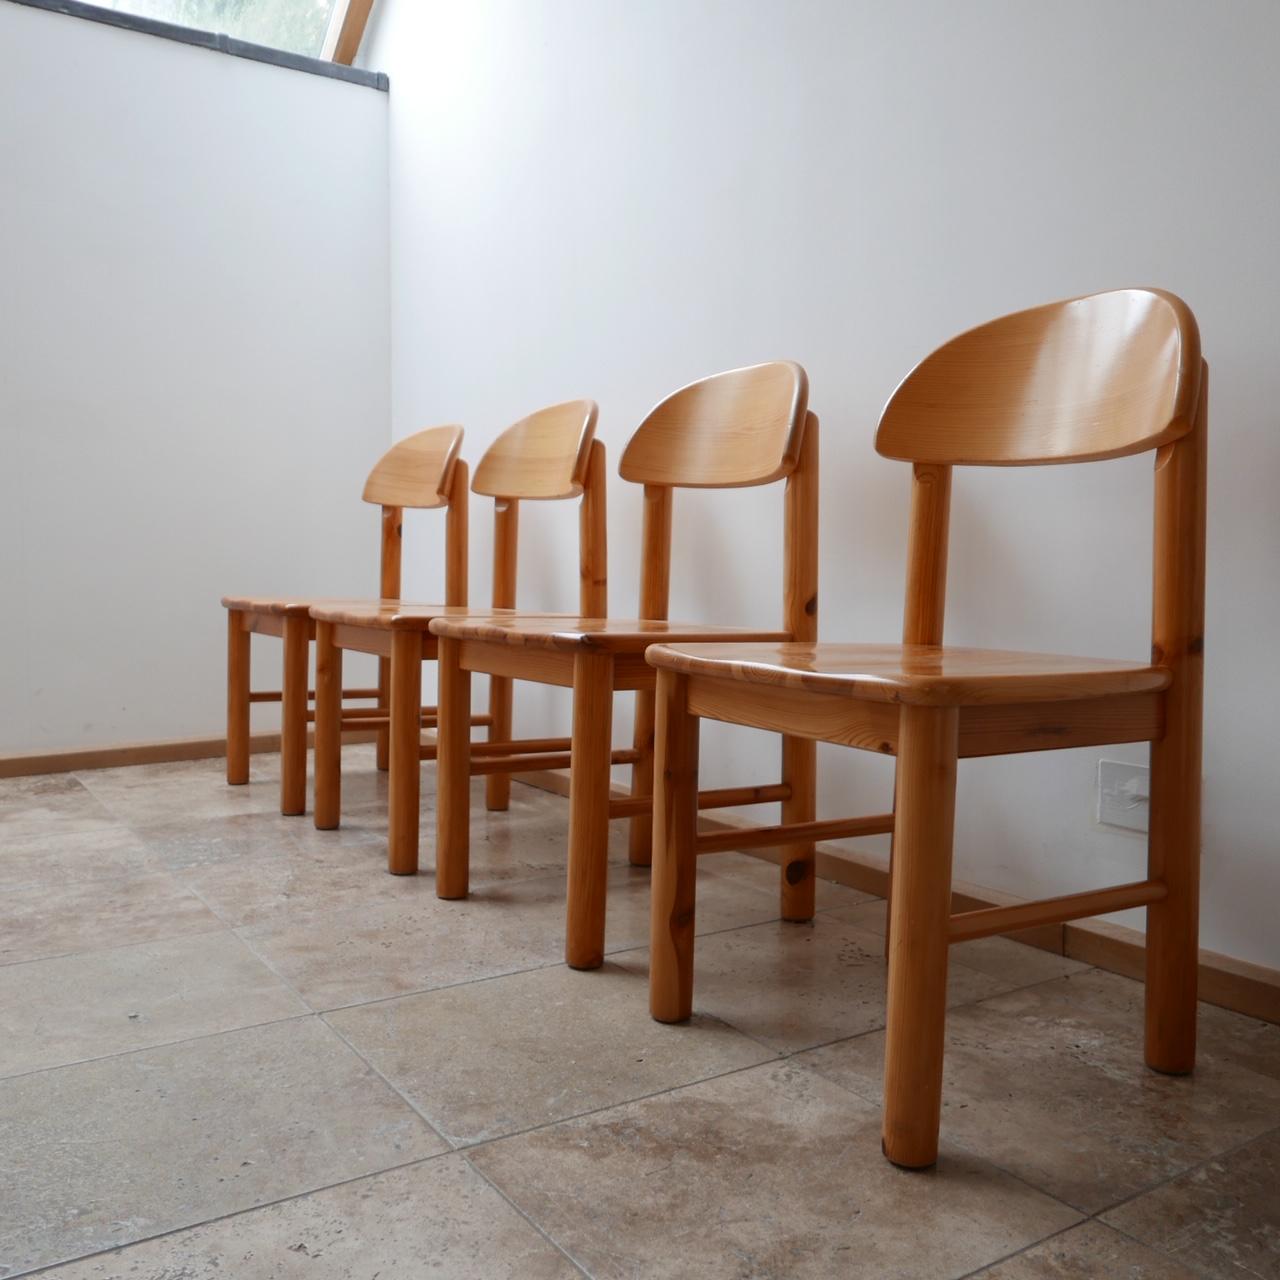 A set of four pine dining chairs,

late 20th century.

Sourced in Holland.

Good condition, some scuffs consistent with age.

Dimensions: 50 W x 45 D x 46.5 seat height x 88 total height in cm.

 